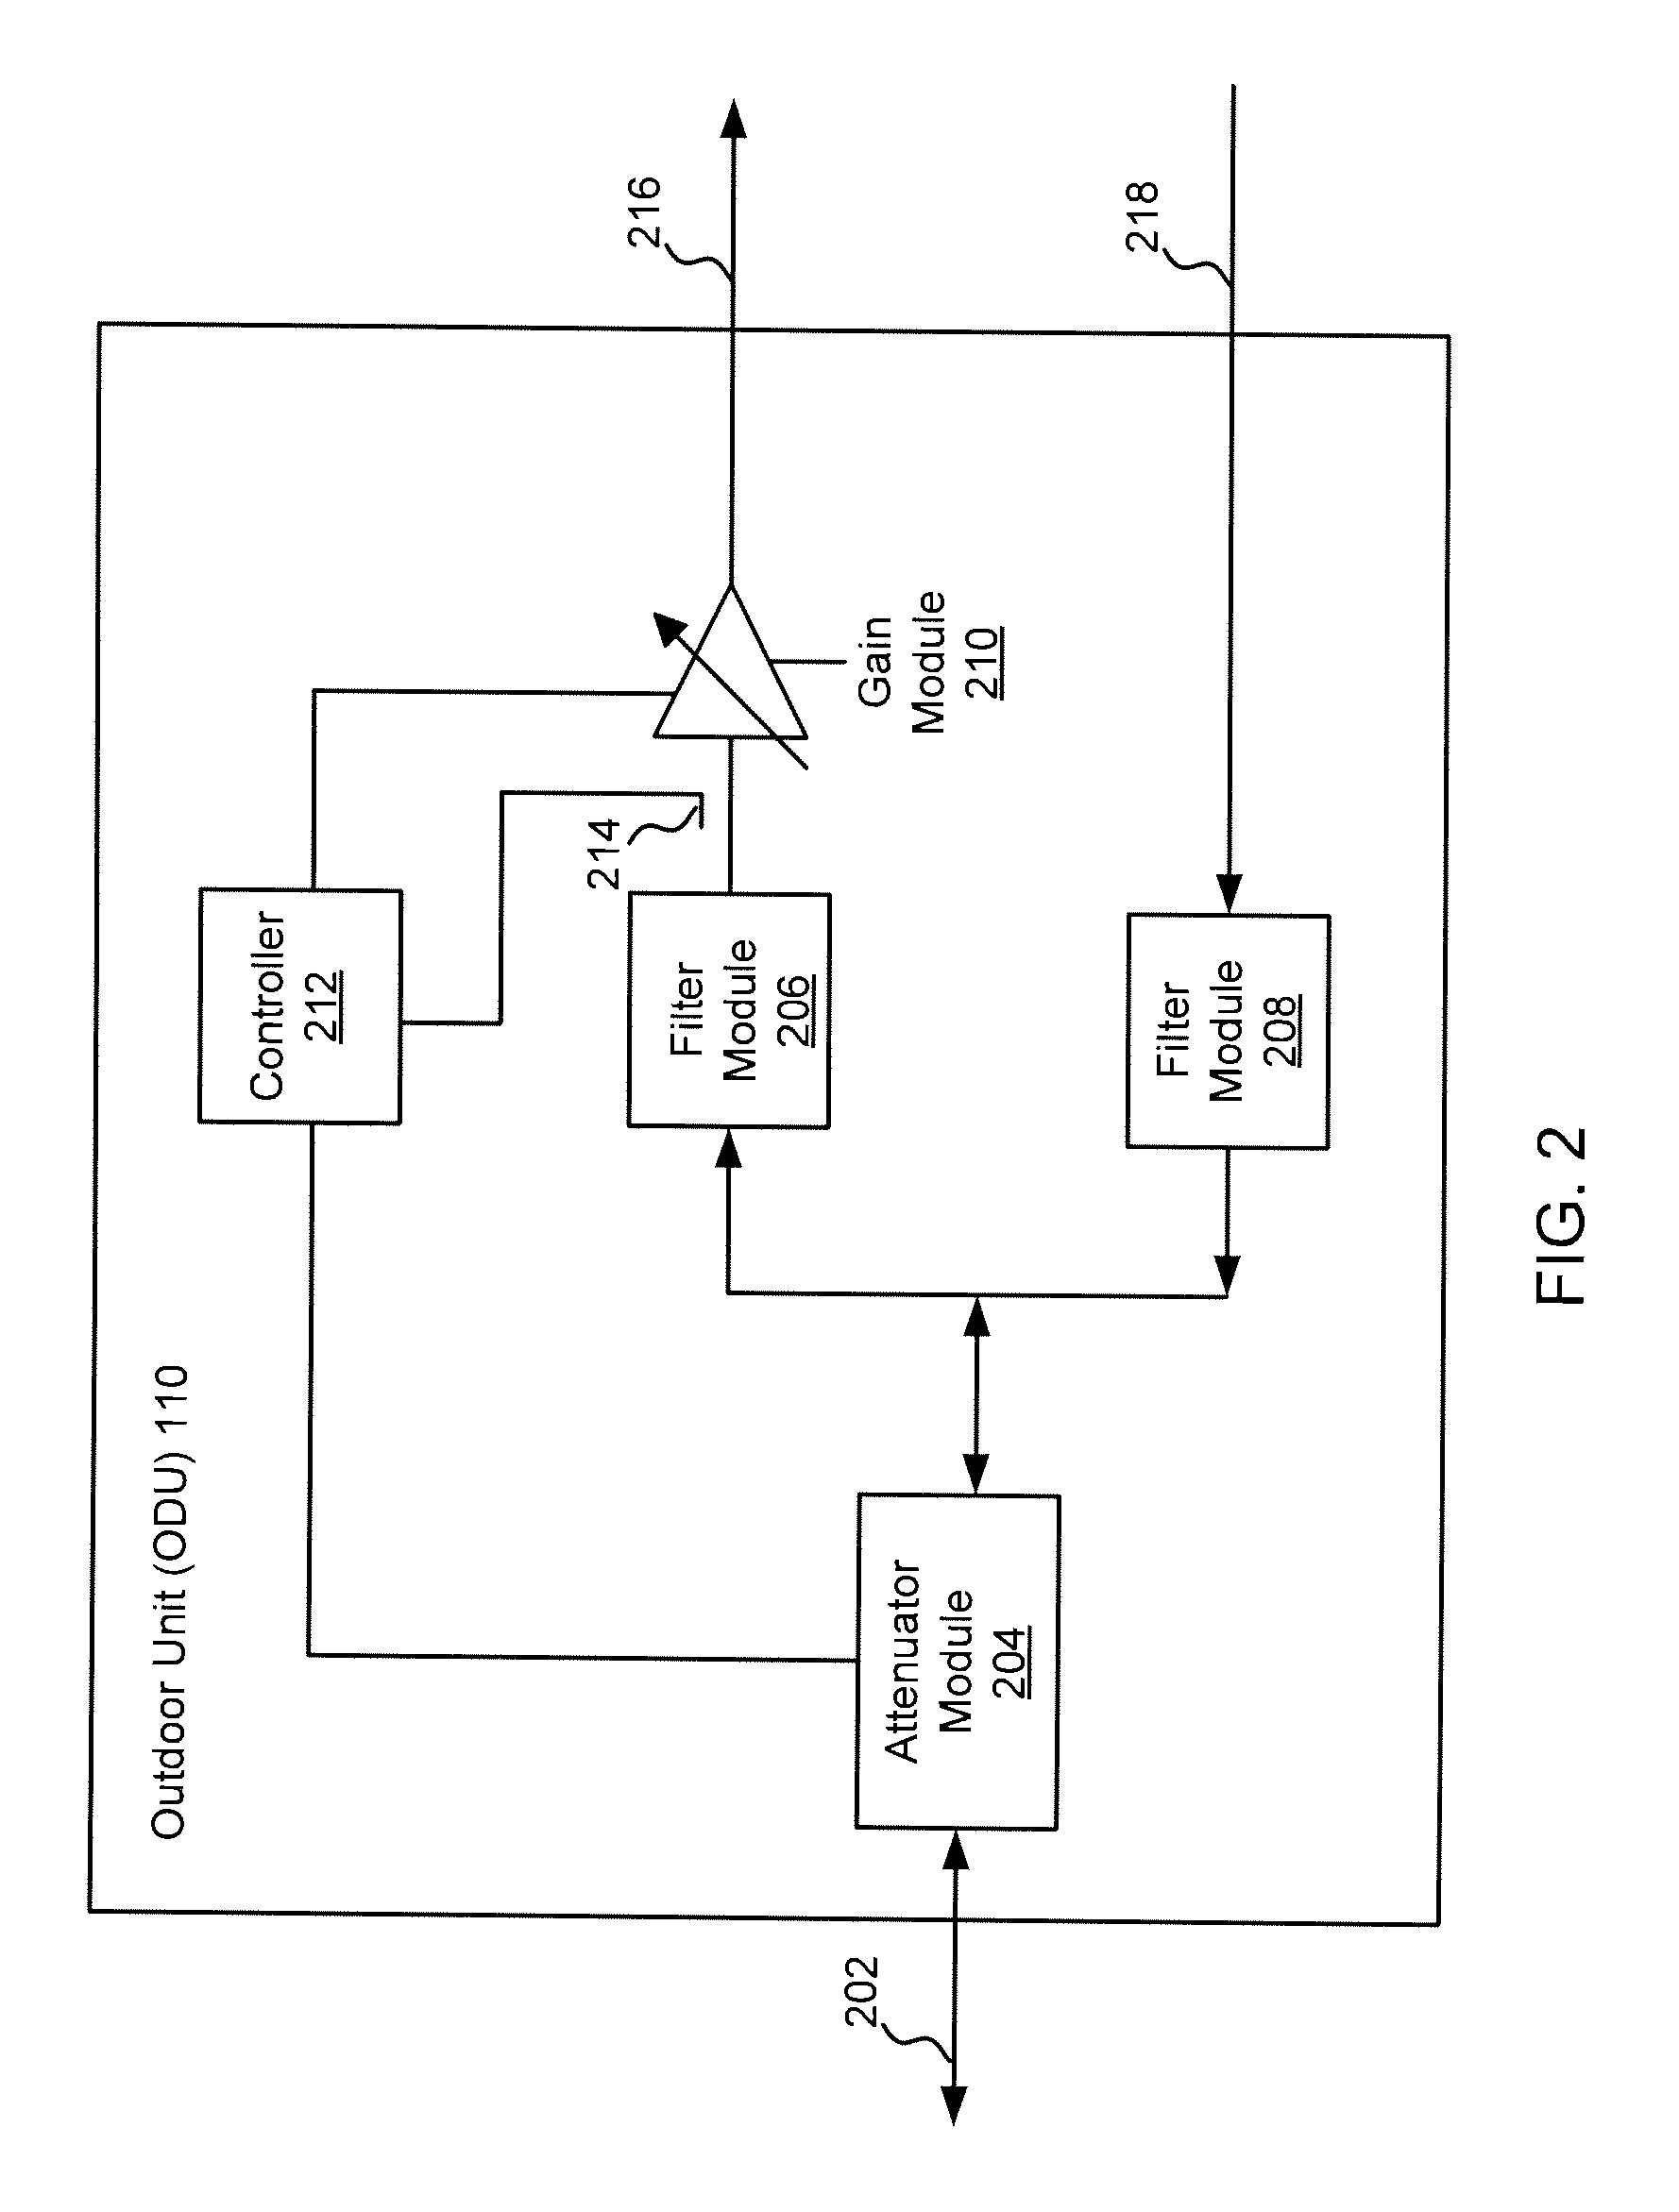 Systems and Methods for Reduction of Triple Transit Effects in Transceiver Communications